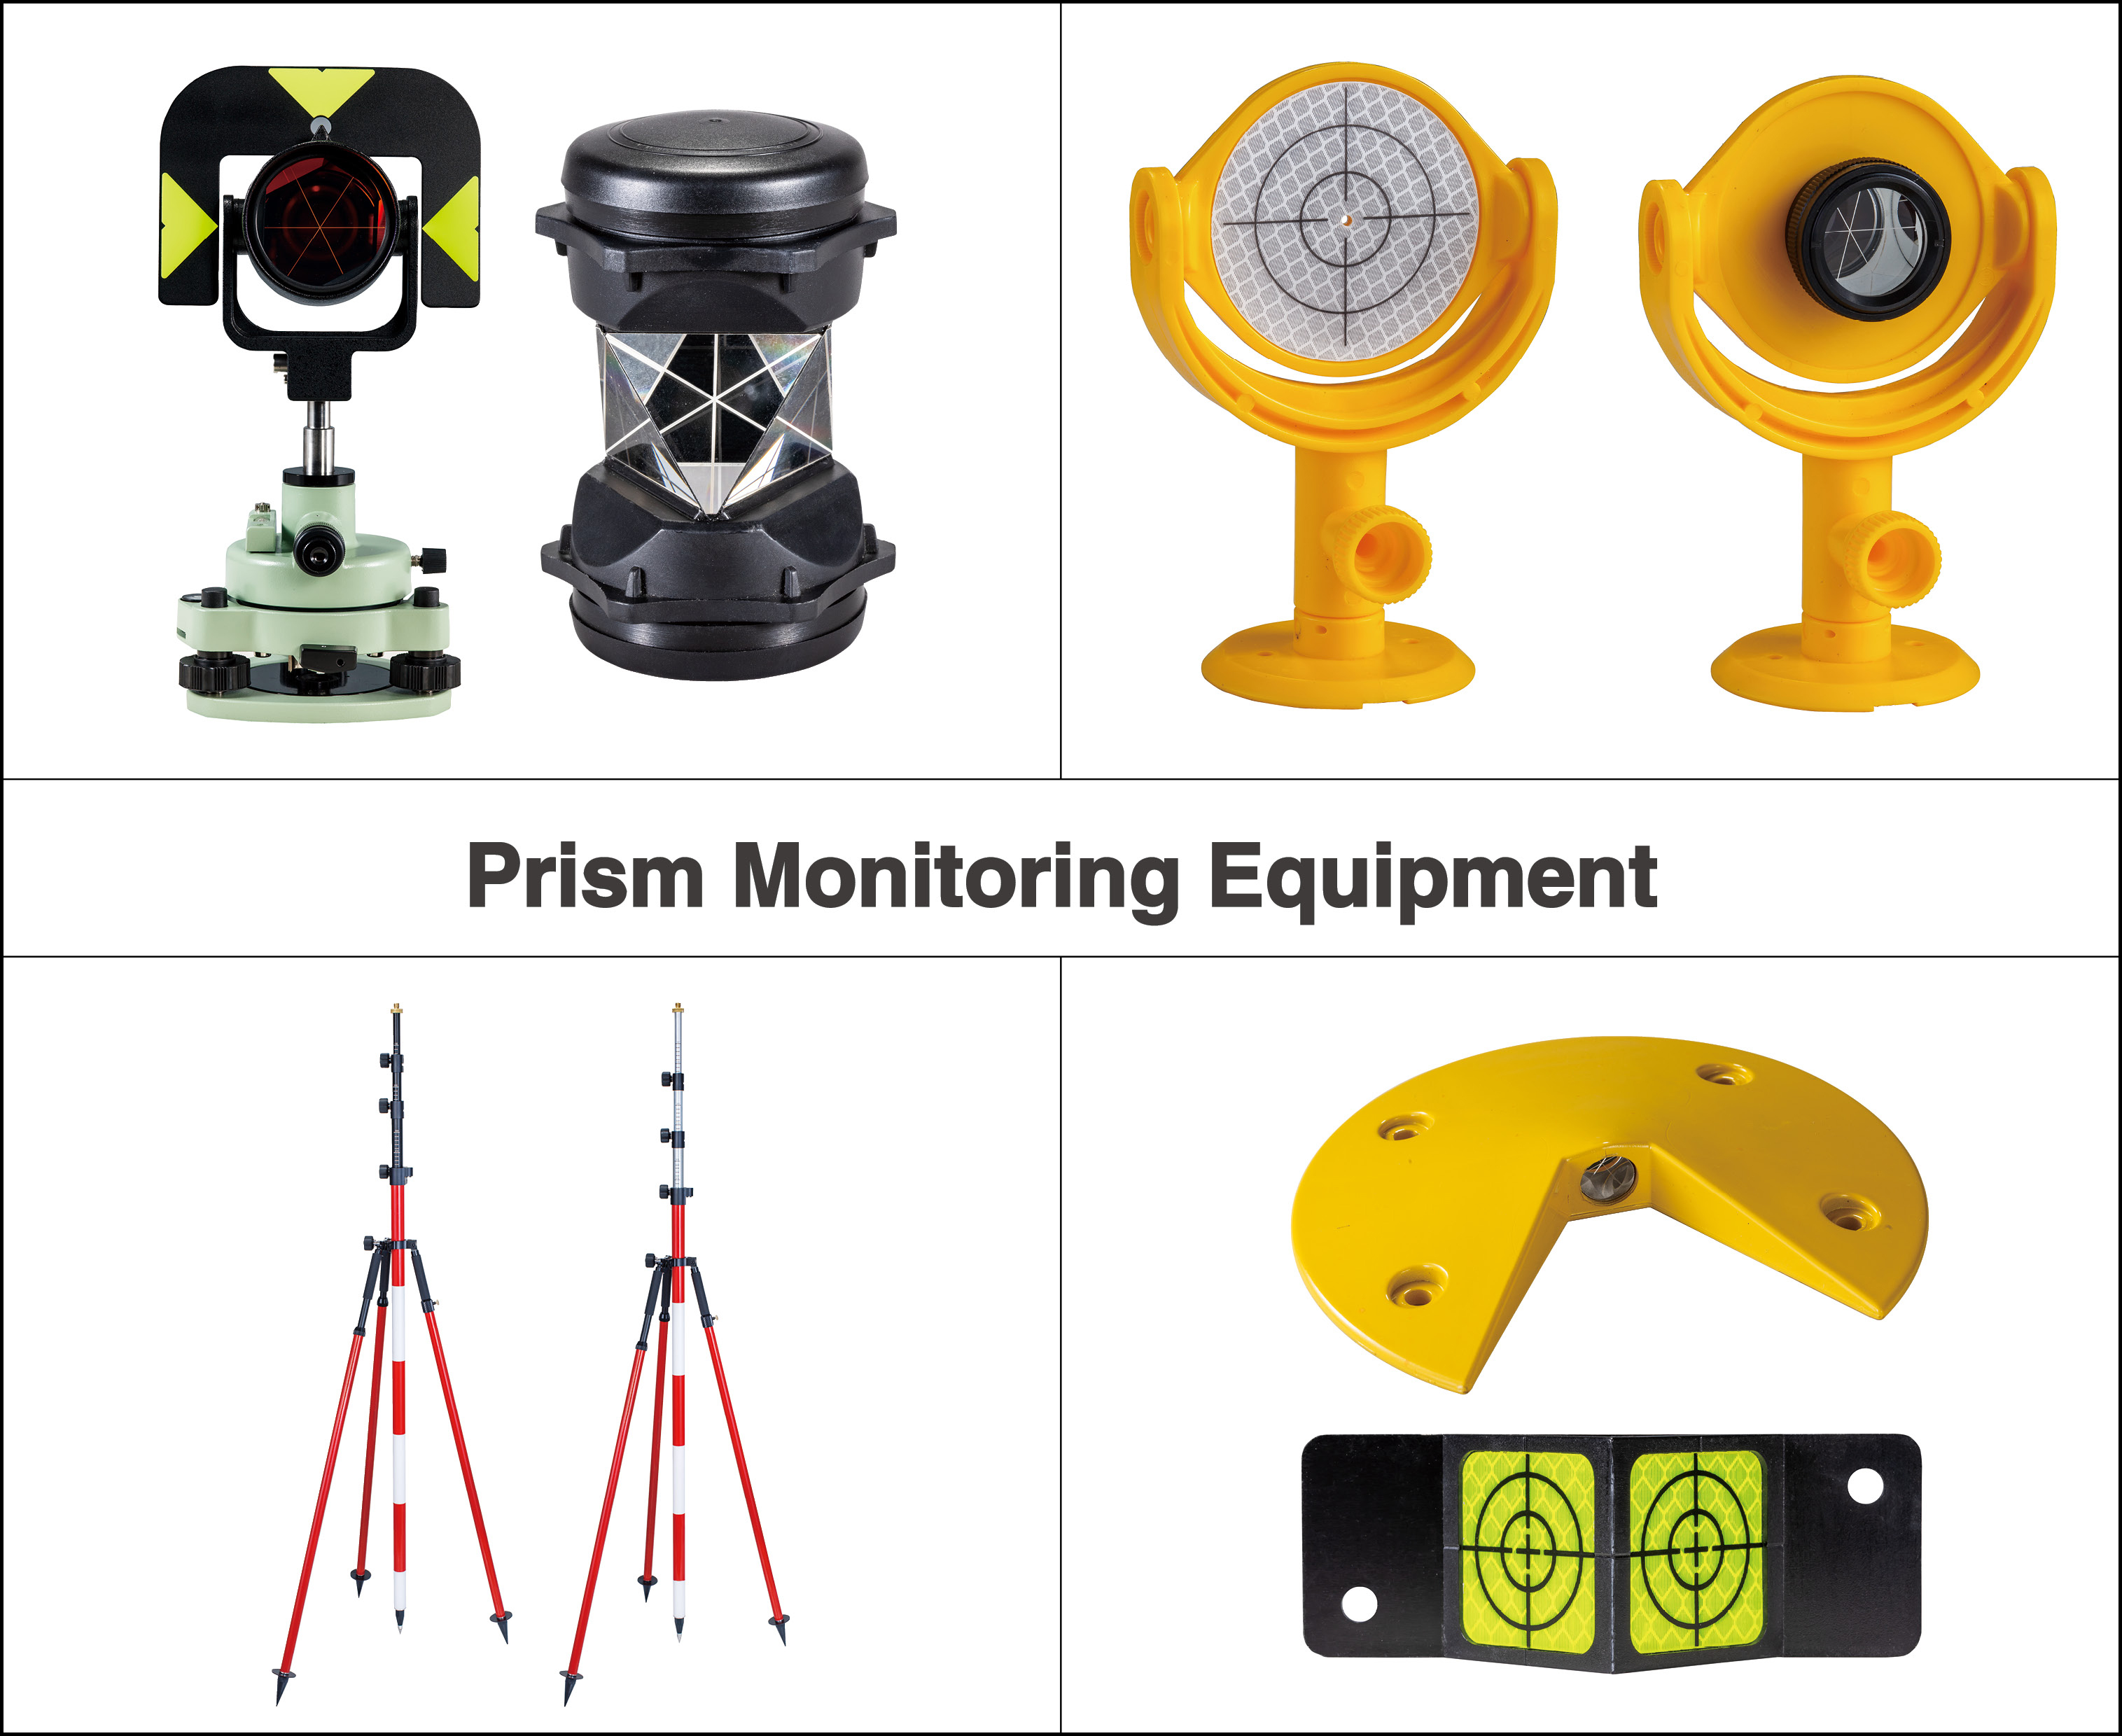 Beyond Basics: Advanced Techniques with Traverse Prism for Precise Surveying